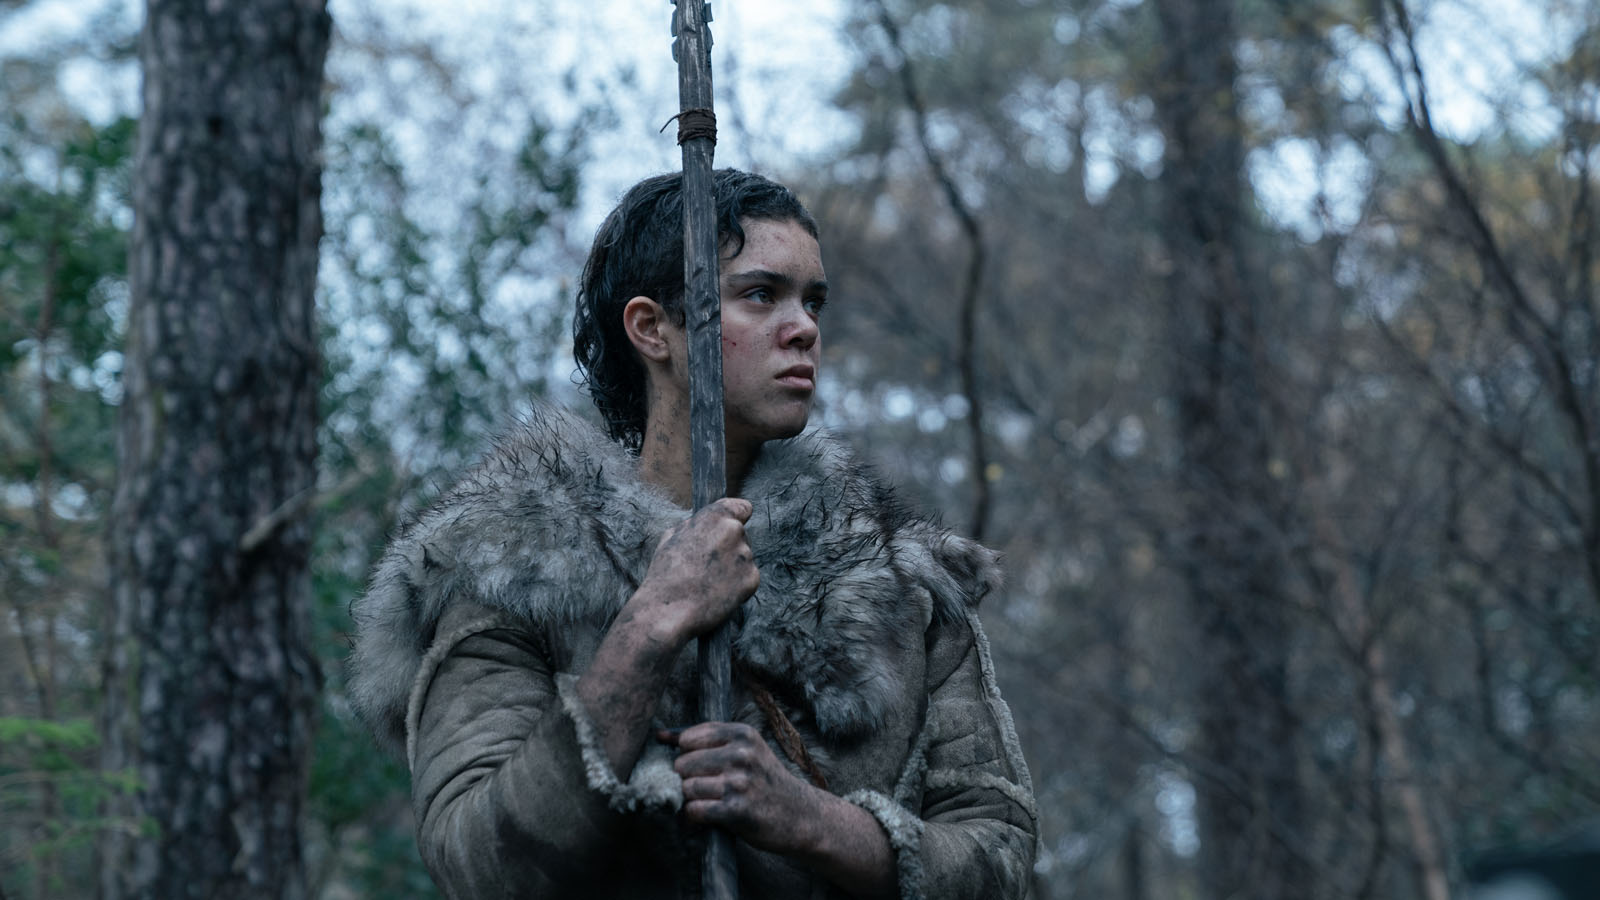 A girl in furs hold a manmade spear.